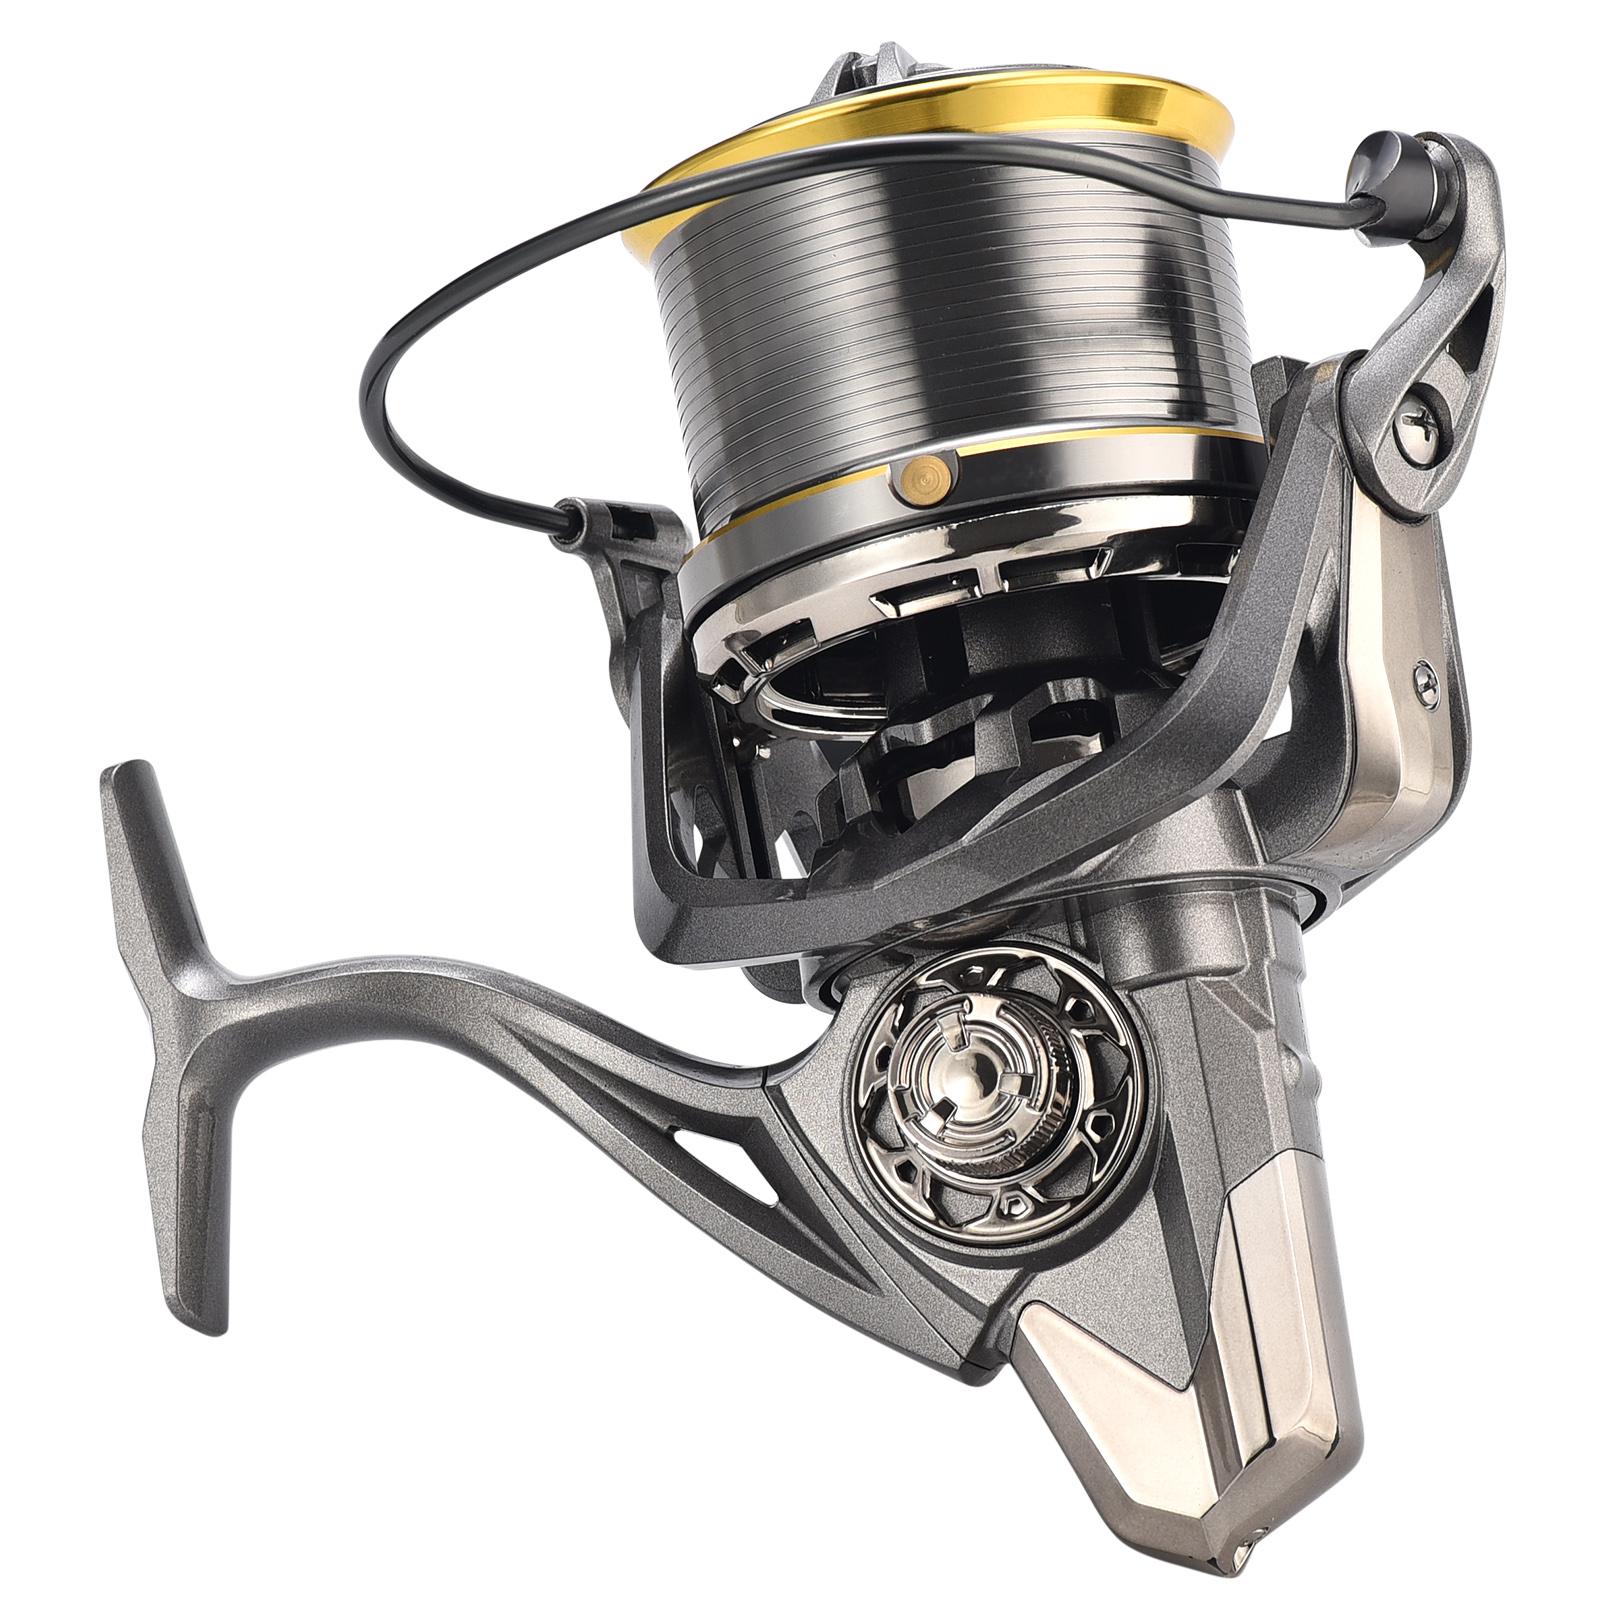 17+1BB Spinning Reel 4.8:1 with Interchangeable Left and Right Handle